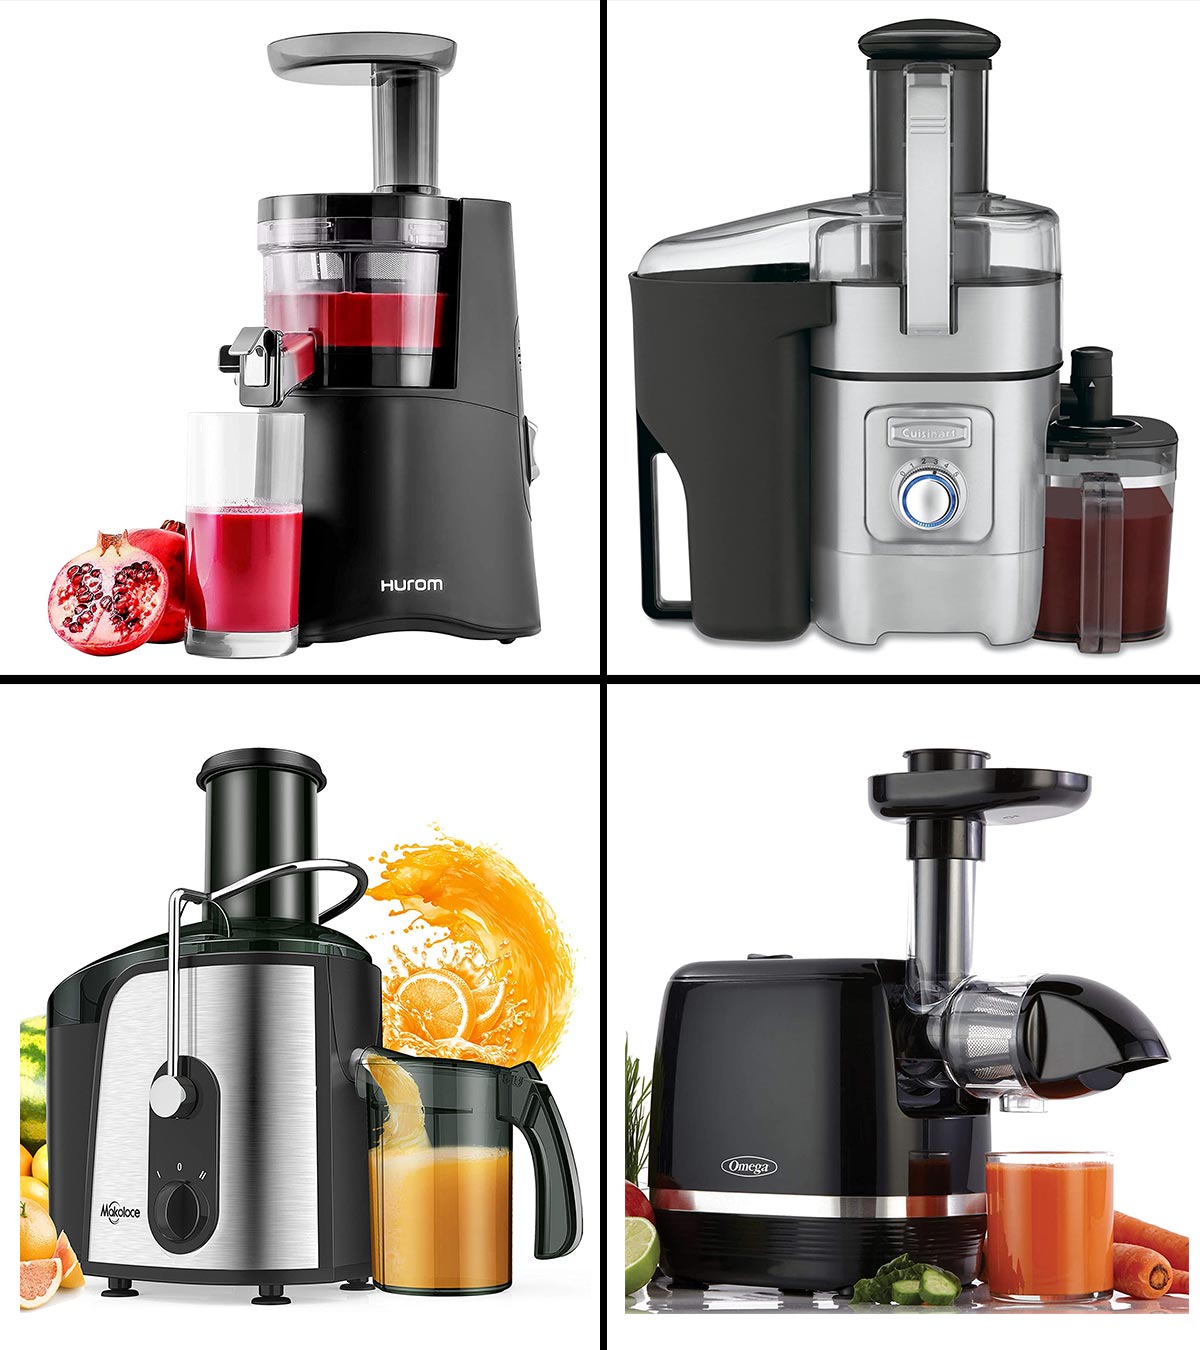 Geepas 800W Juice Extractor Centrifugal Juicer Juicer for Whole Fruit & Vegetables Ideal for Apple Carrot Pear & Orange 1500ML Pulp Container 2 Year Warranty 85MM Feed Tube for Whole Apple 